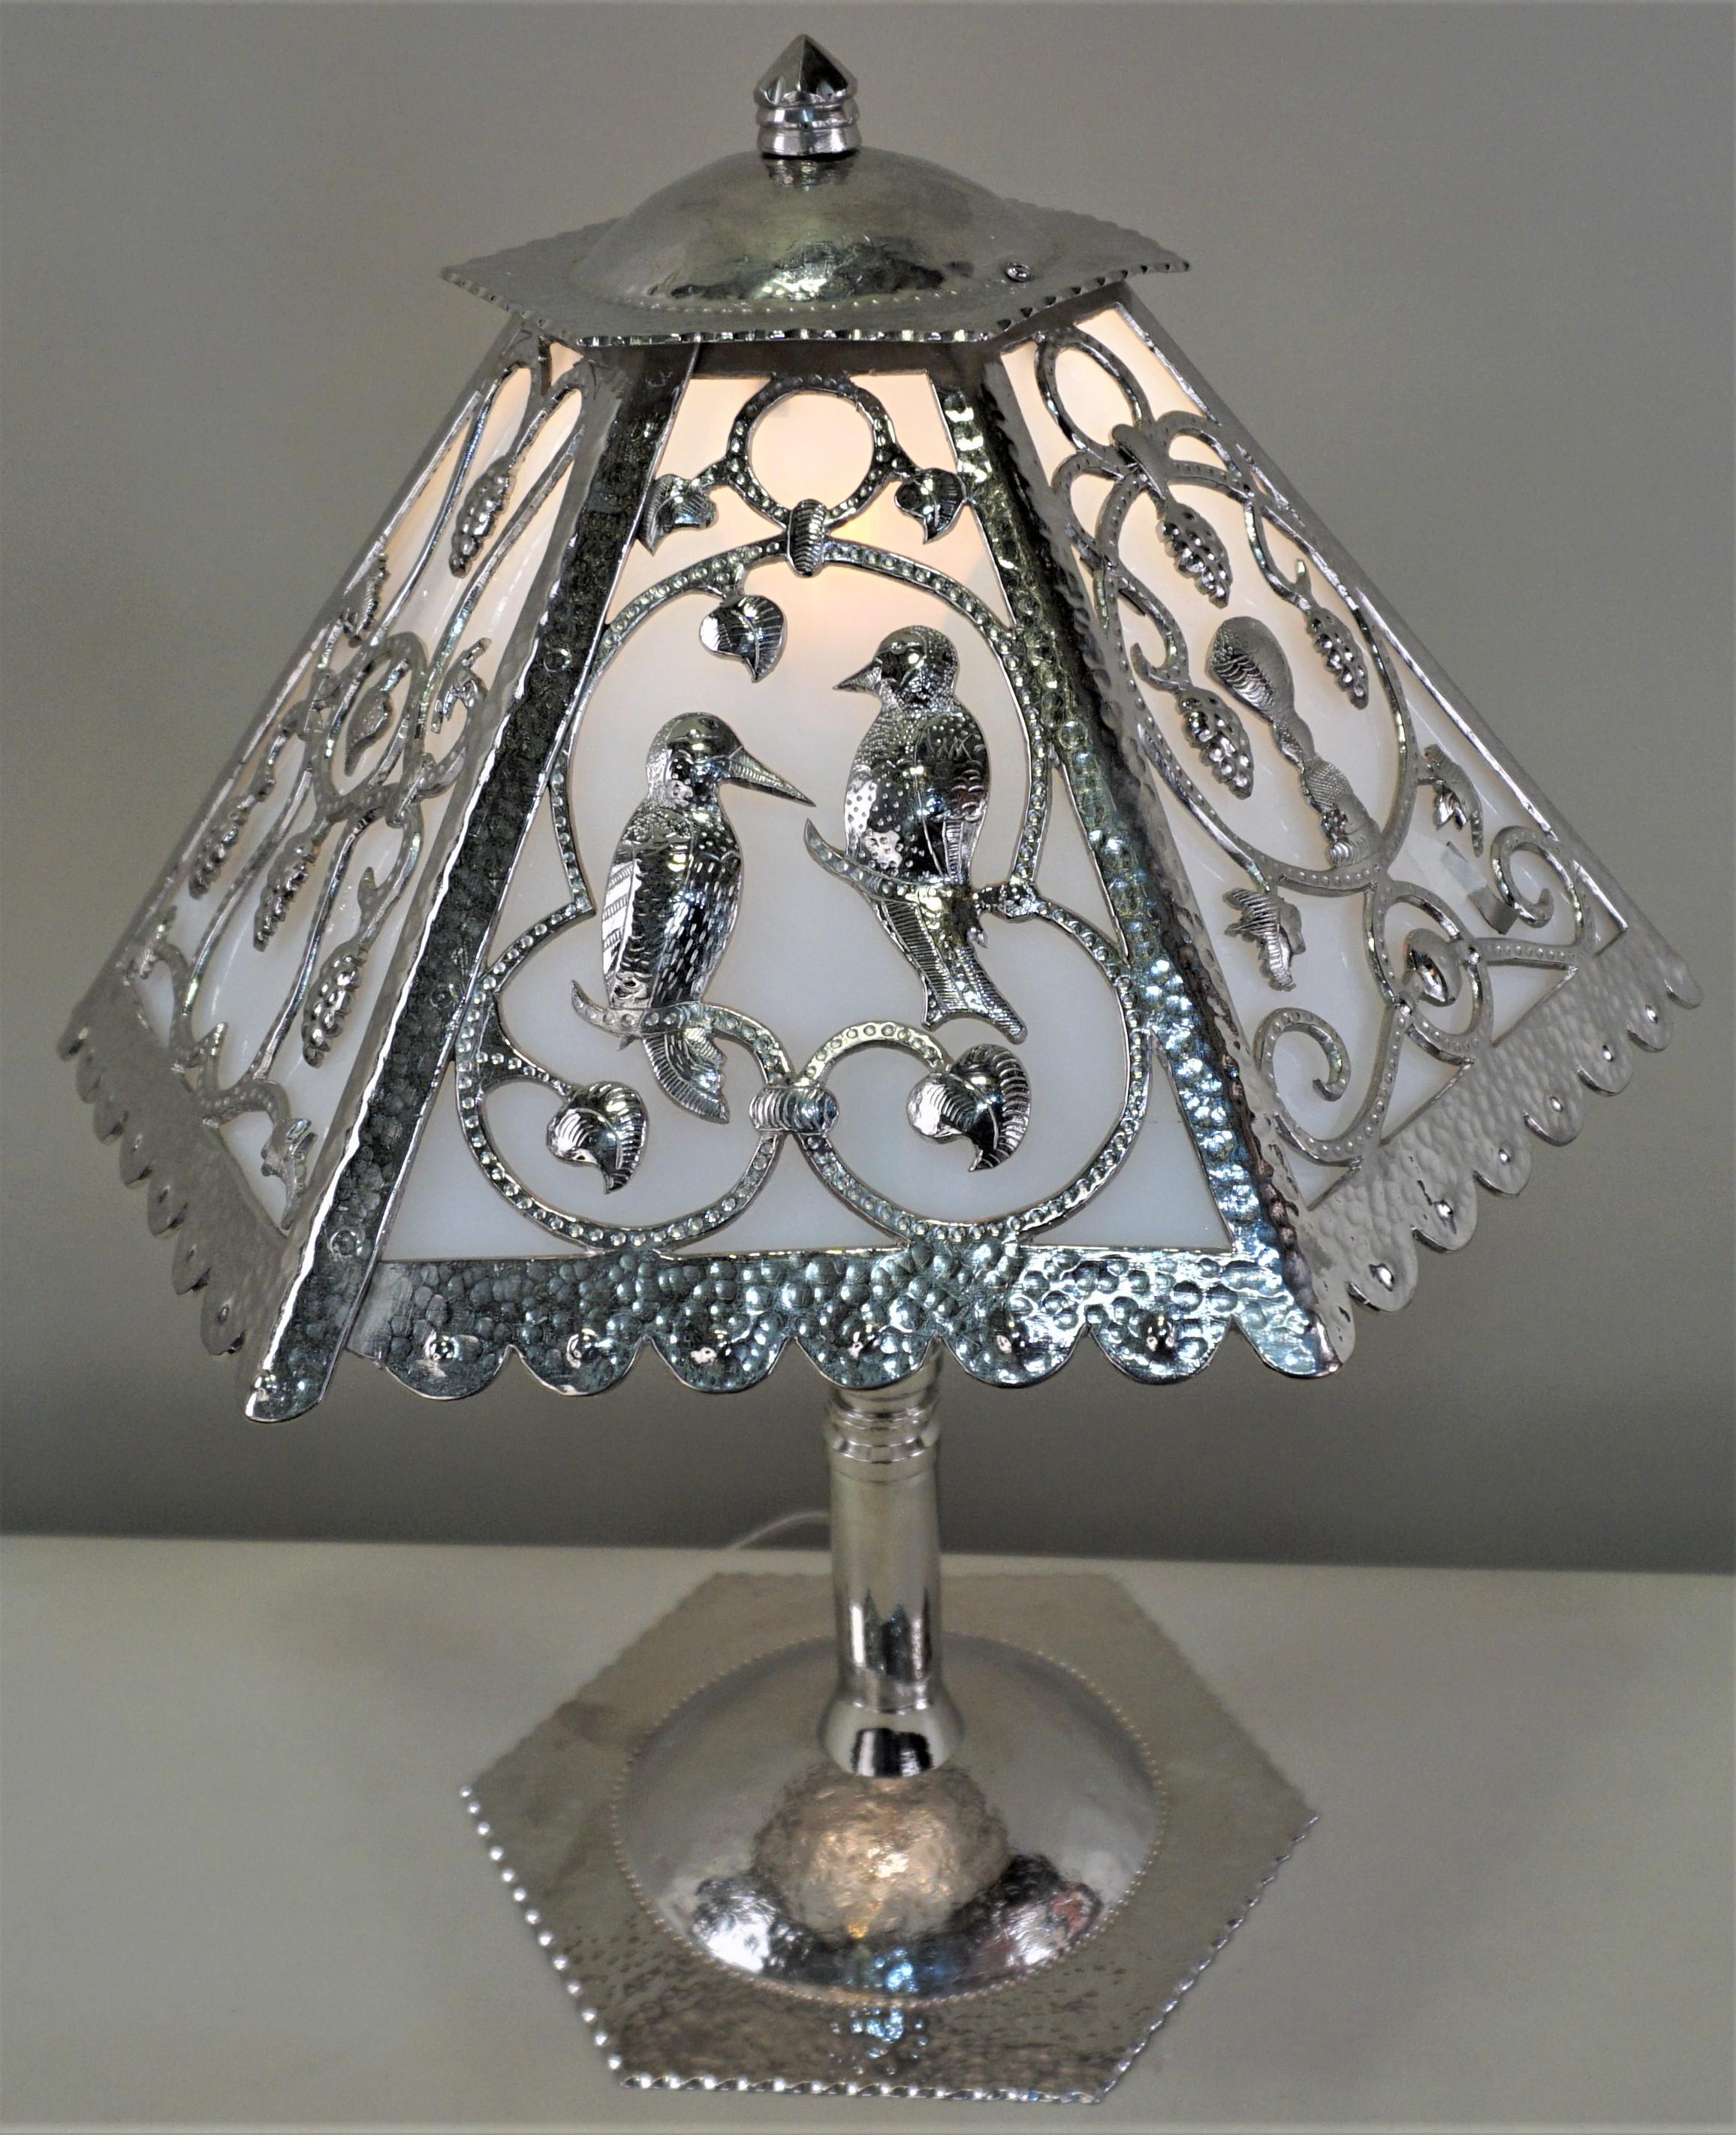 Handcrafted metal work, a rare and one of a kind French Art Deco table lamp. A metal smith masterfully created a six-panel shade, each with a different design, from three sections of heavy gauge bronze using a chisel and hammer. Base was created